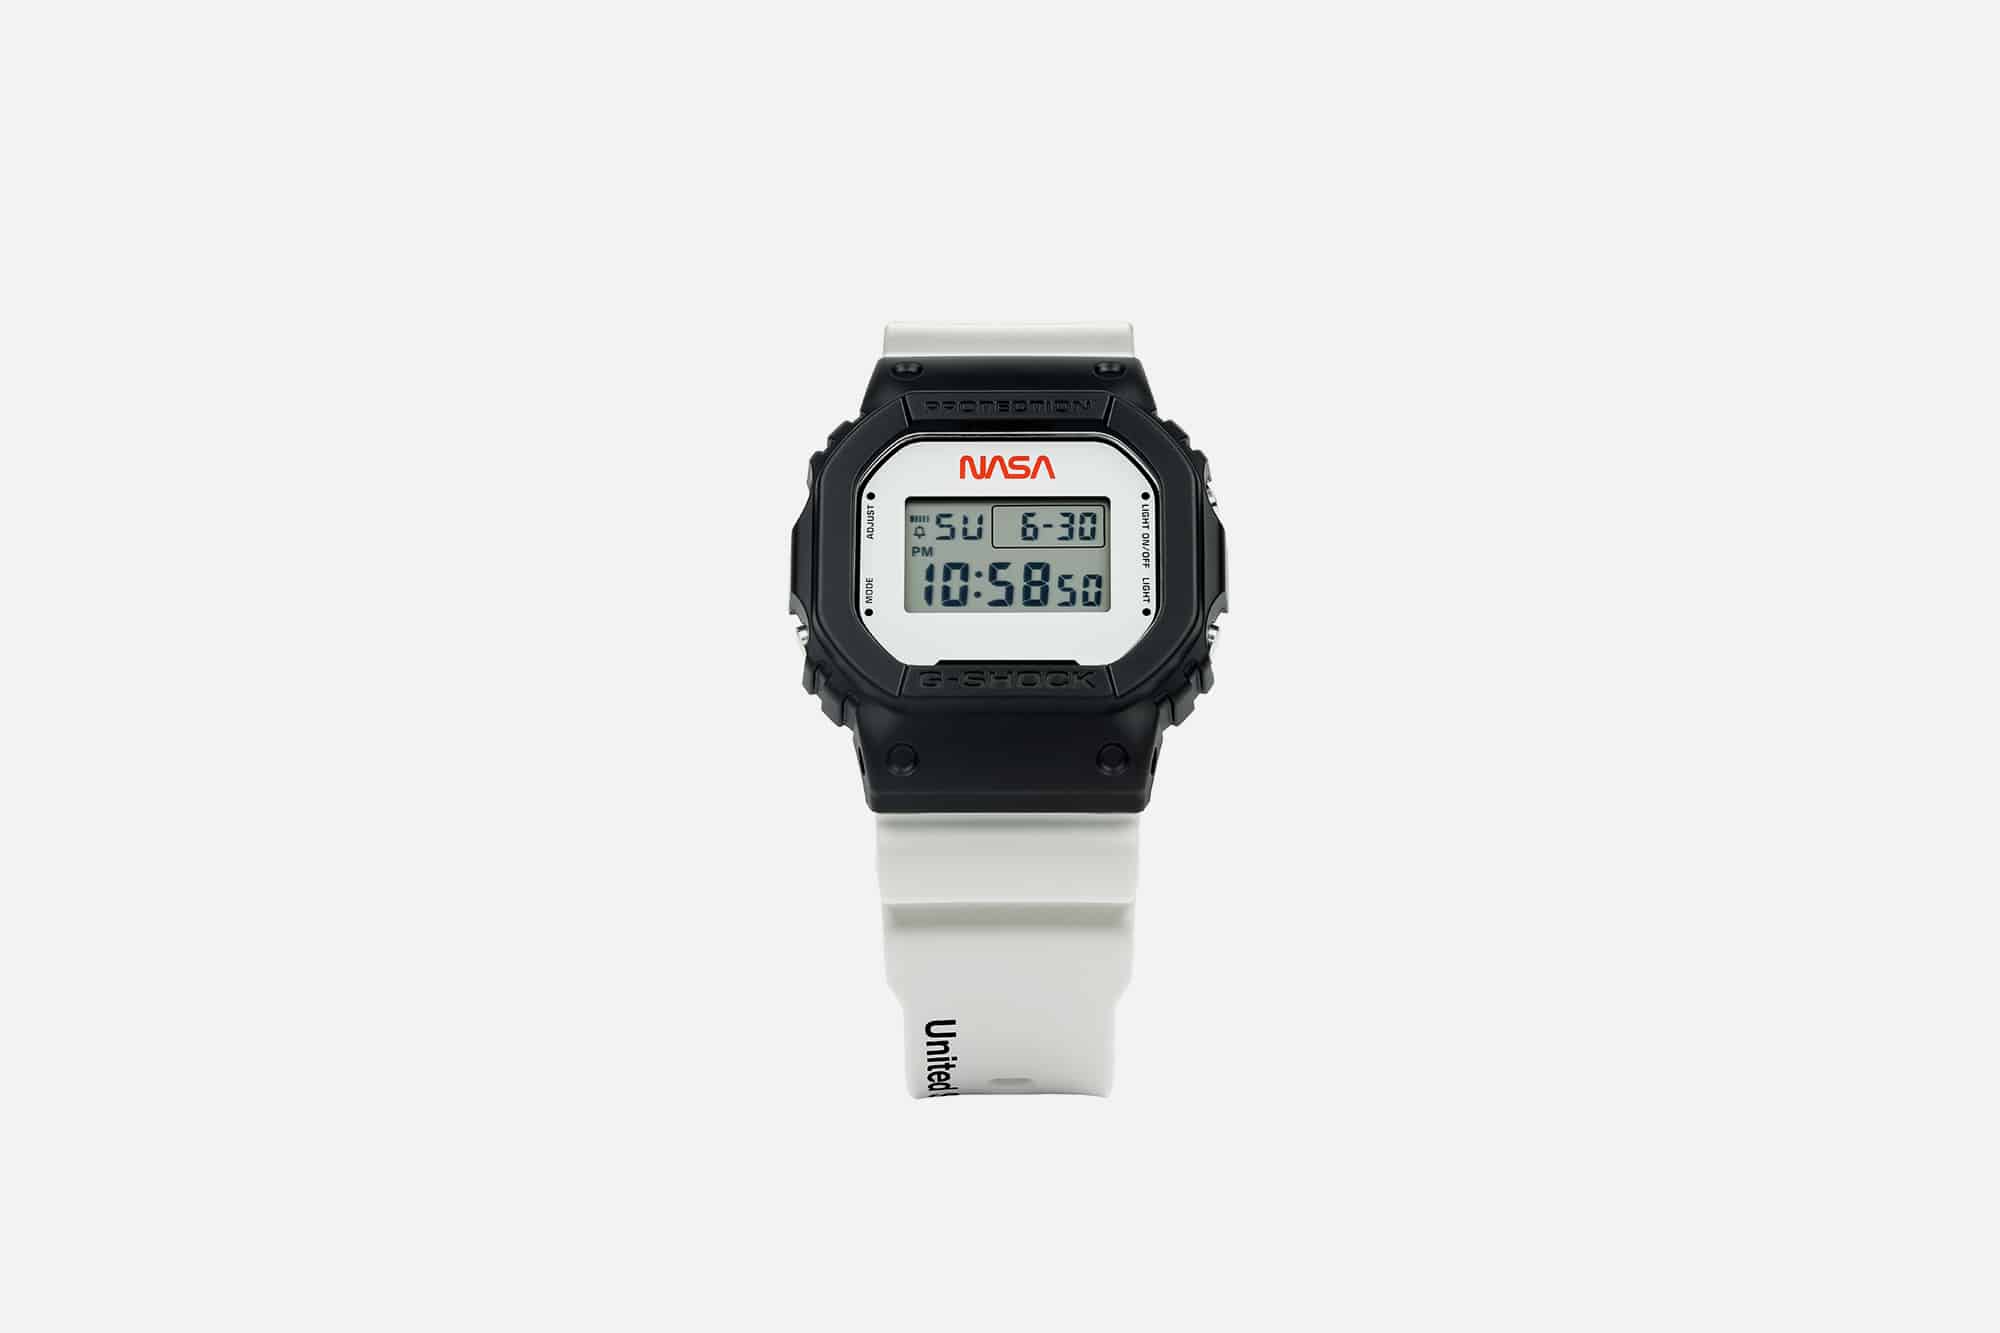 Introducing the Latest Collaboration From NASA and G-Shock